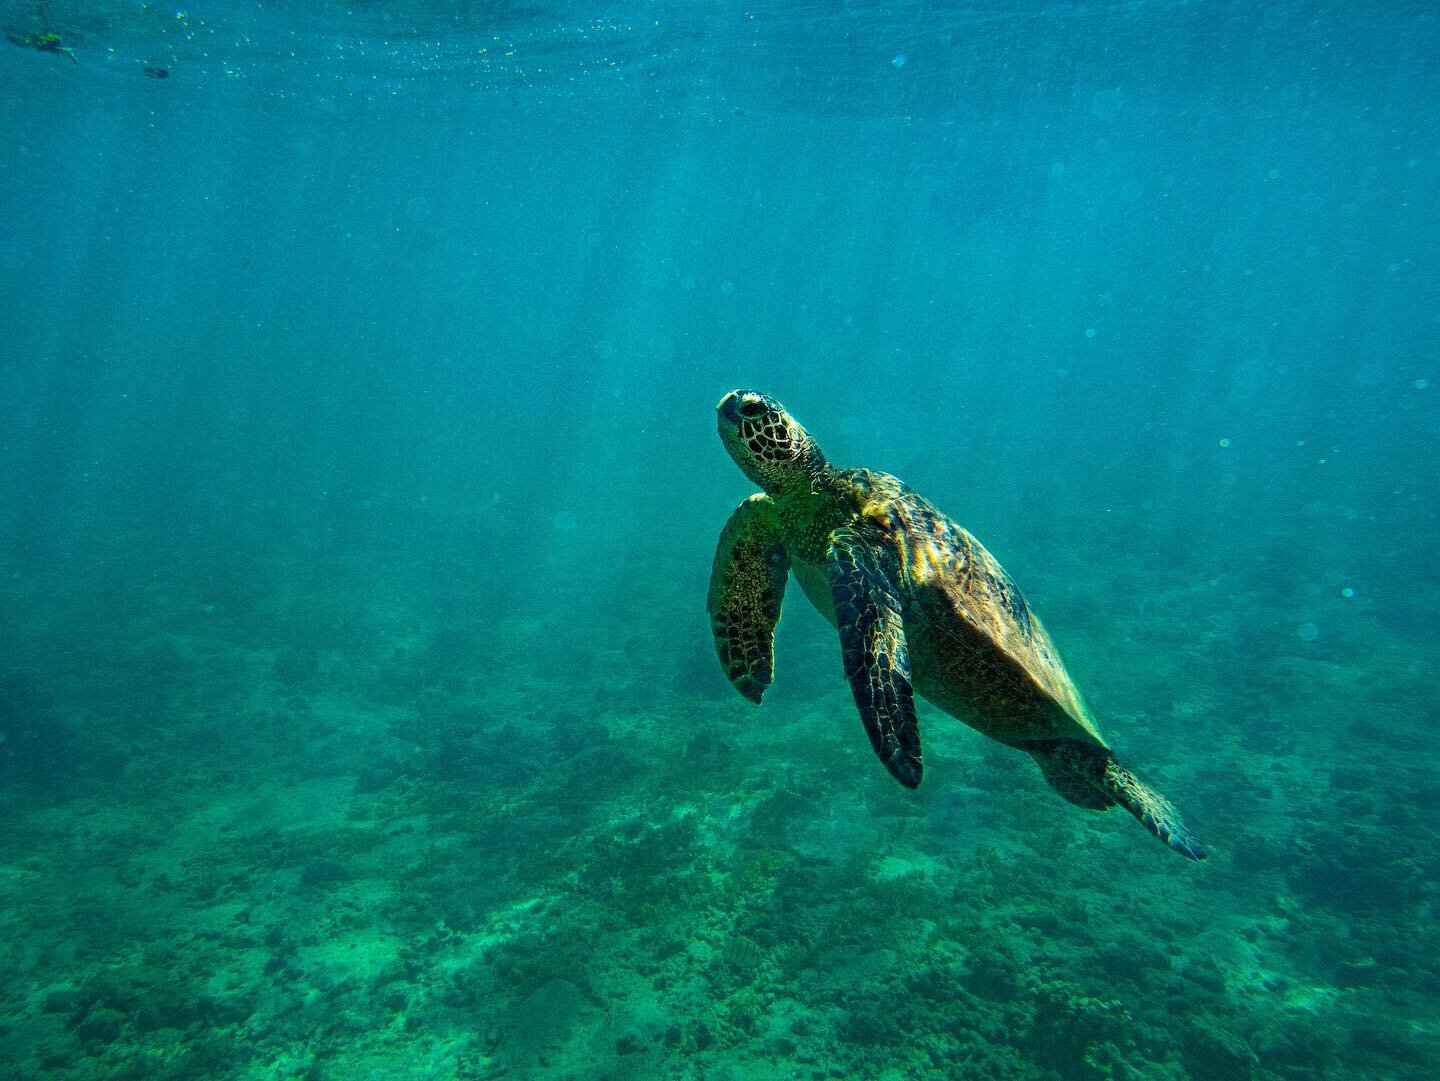 I&rsquo;ll be the first to admit I still have a lot to learn about underwater photography... but I sure had fun photographing this beautiful Hawaiian Green Sea Turtle in Kauai! 

I learned while visiting Kauai that this turtle species is the most com